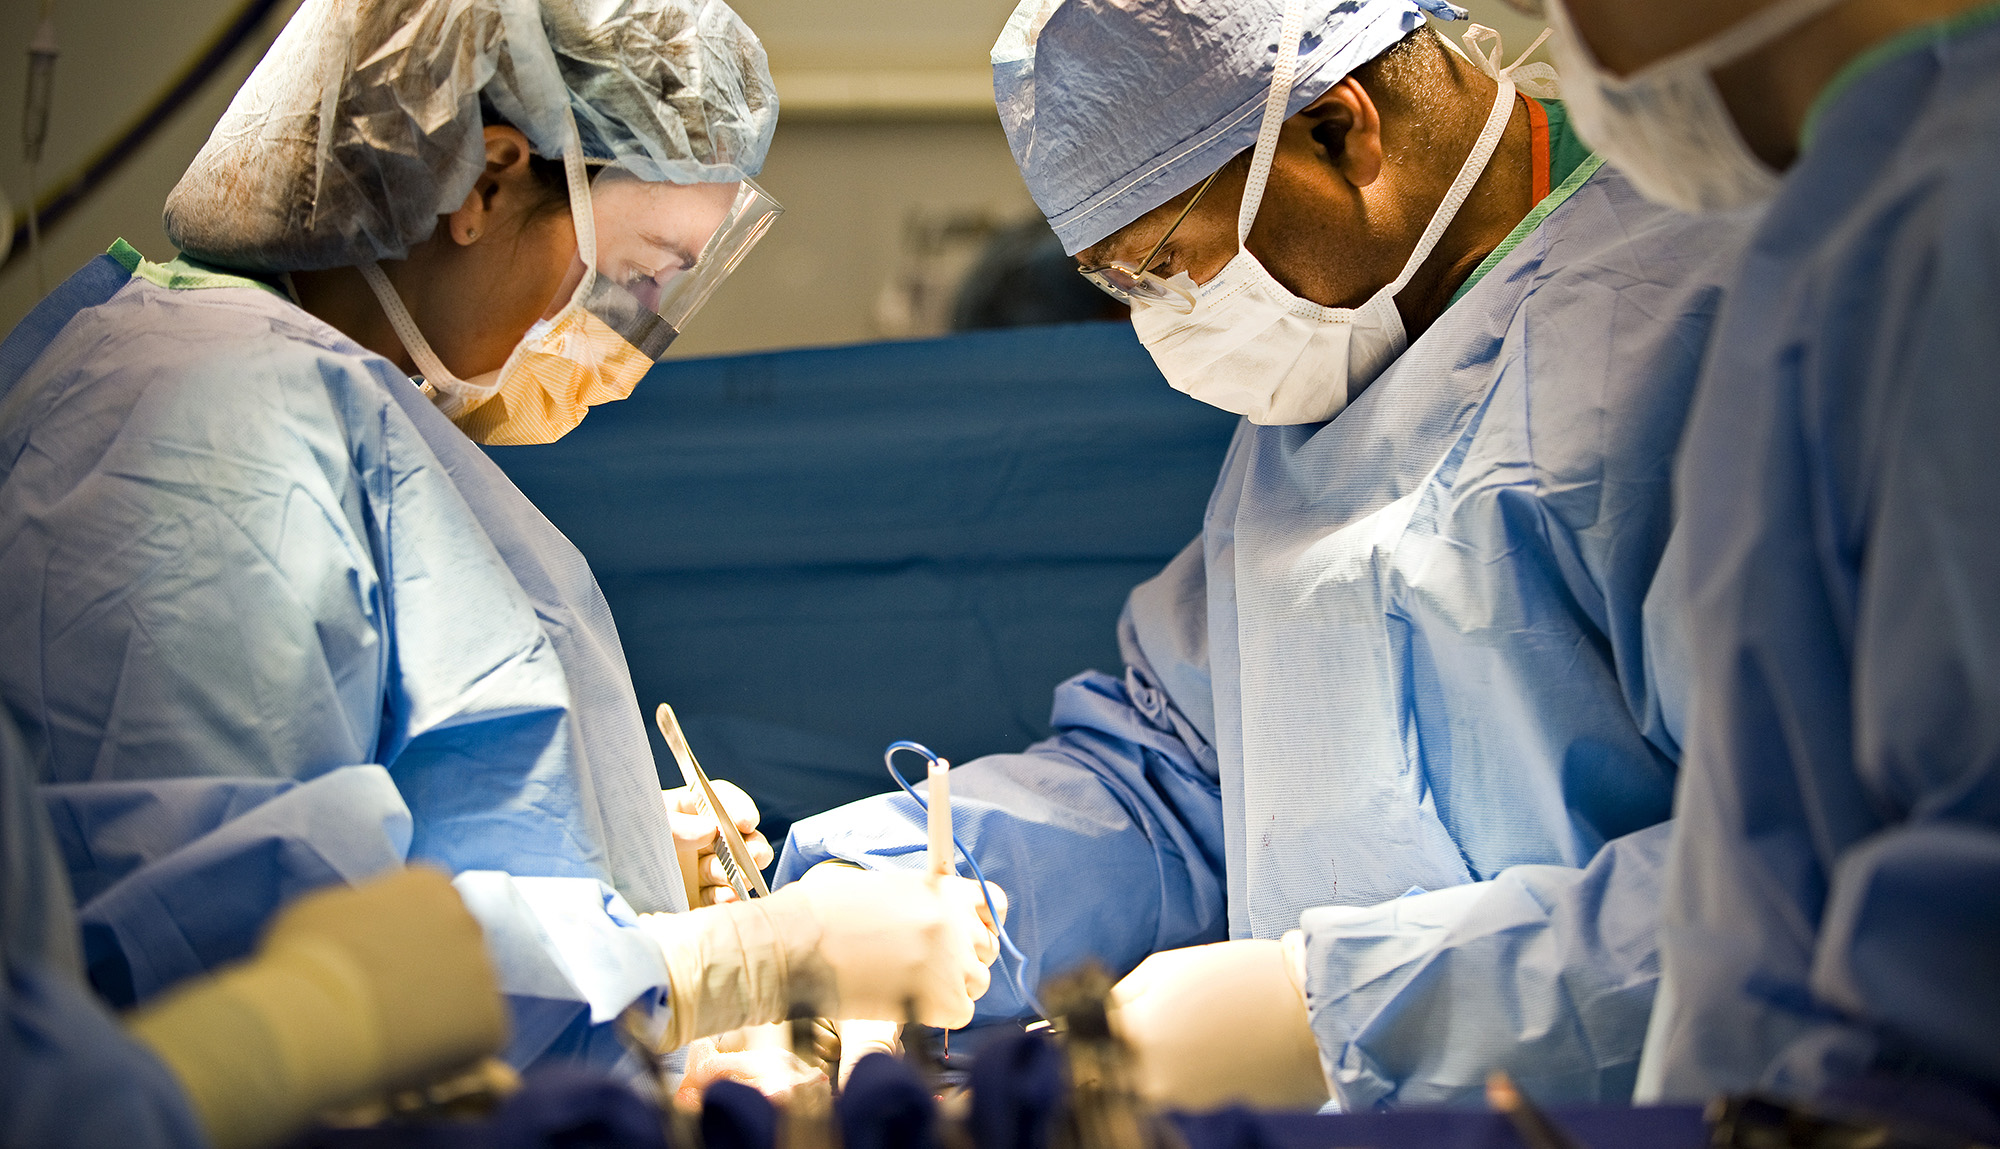 Dr. Britt and a team of EVMS surgeons operate on a patient.